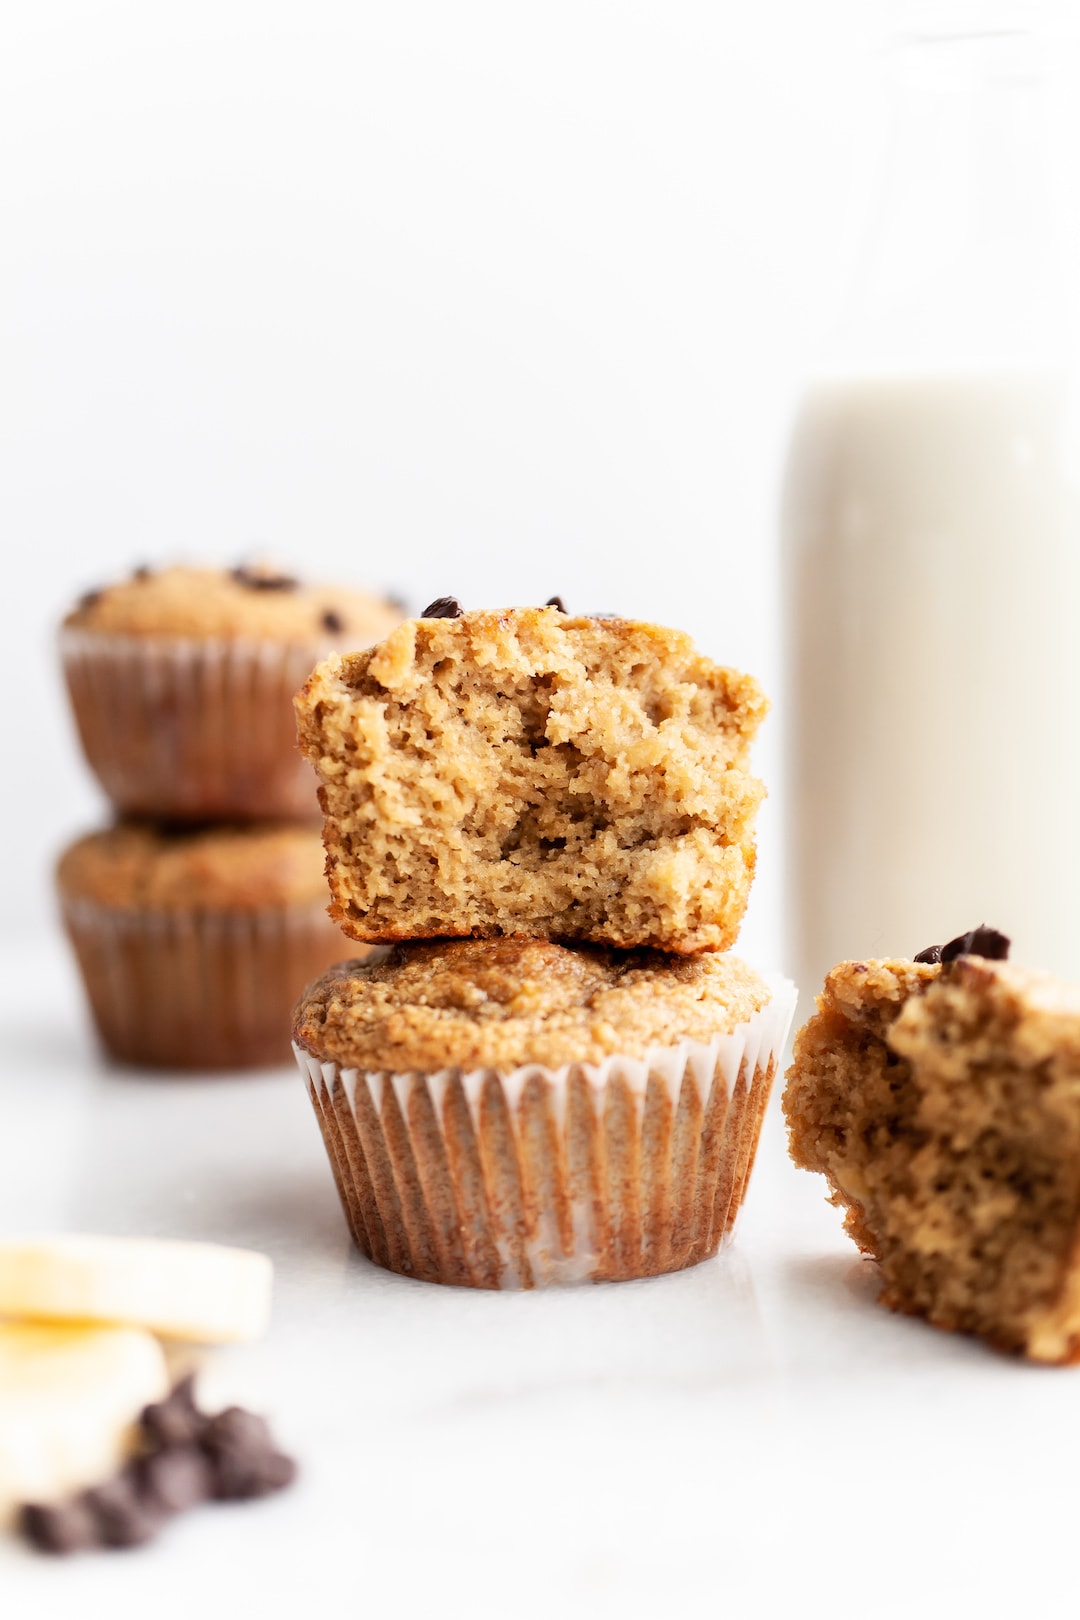 EASY Almond Flour Banana Muffins! | Low Carb, Paleo, Dairy Free